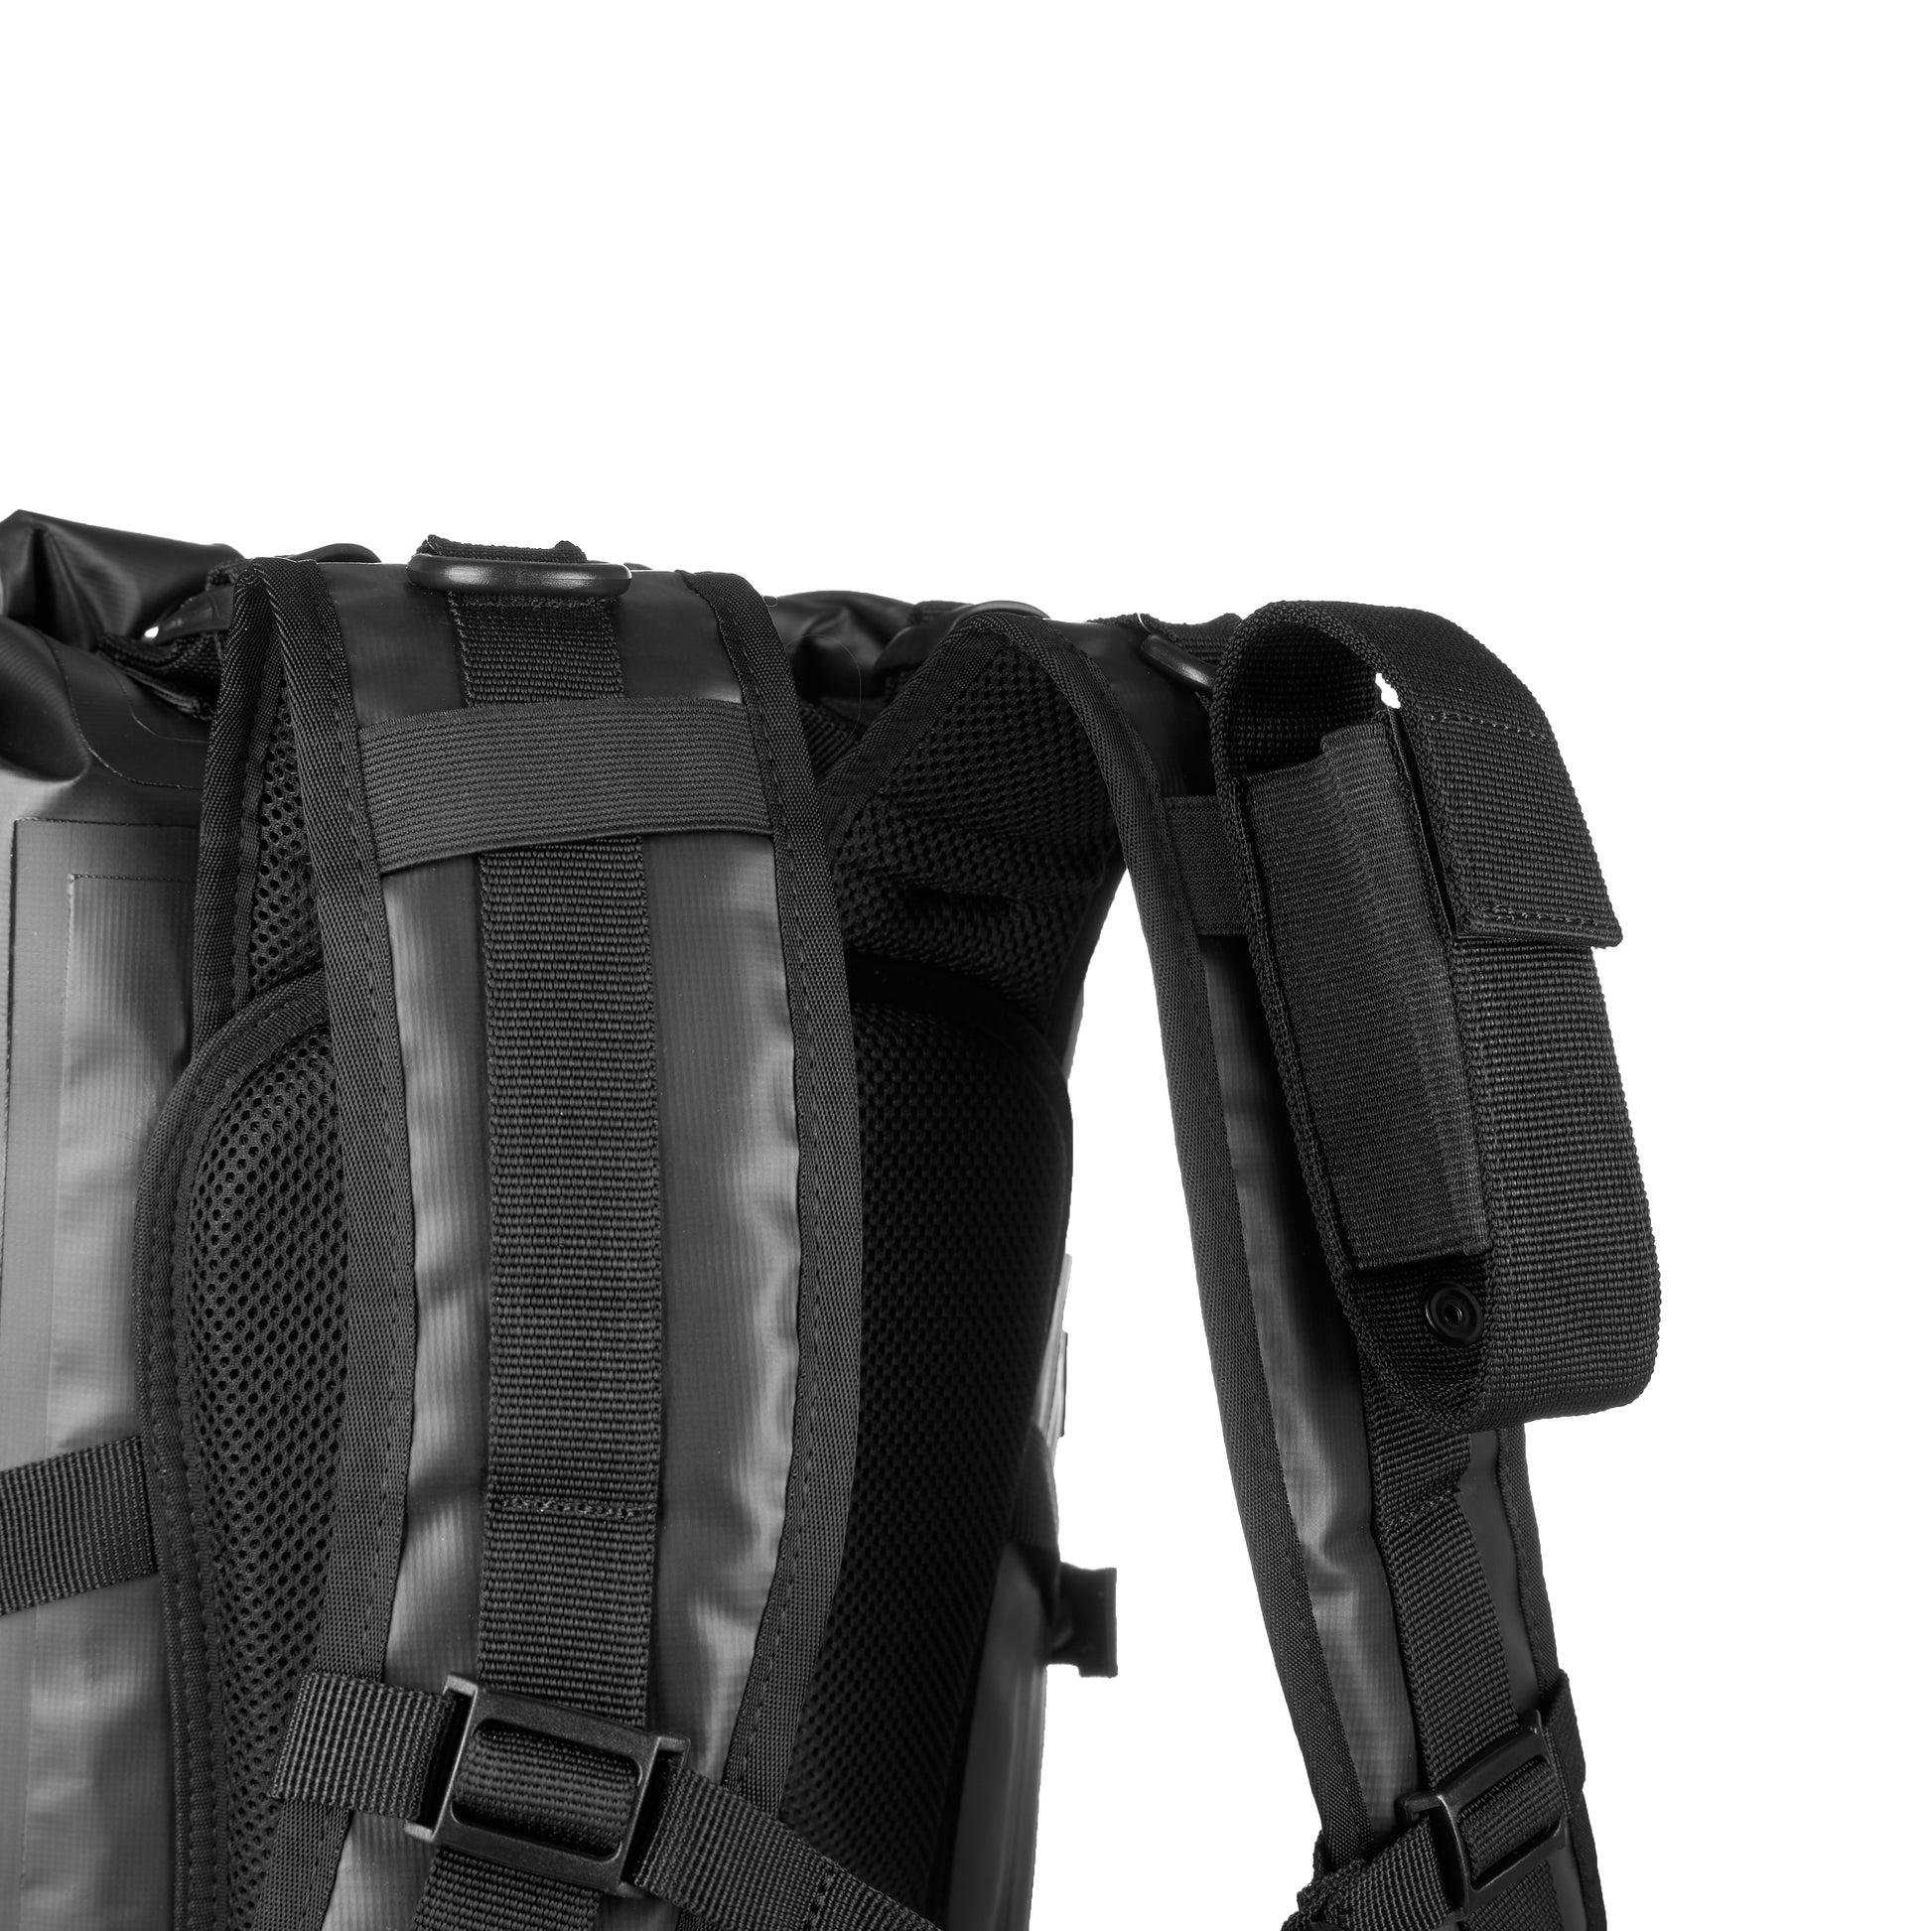 Waterproof Go Bag for Camping, Hiking, and Survival - Drakon Outdoors